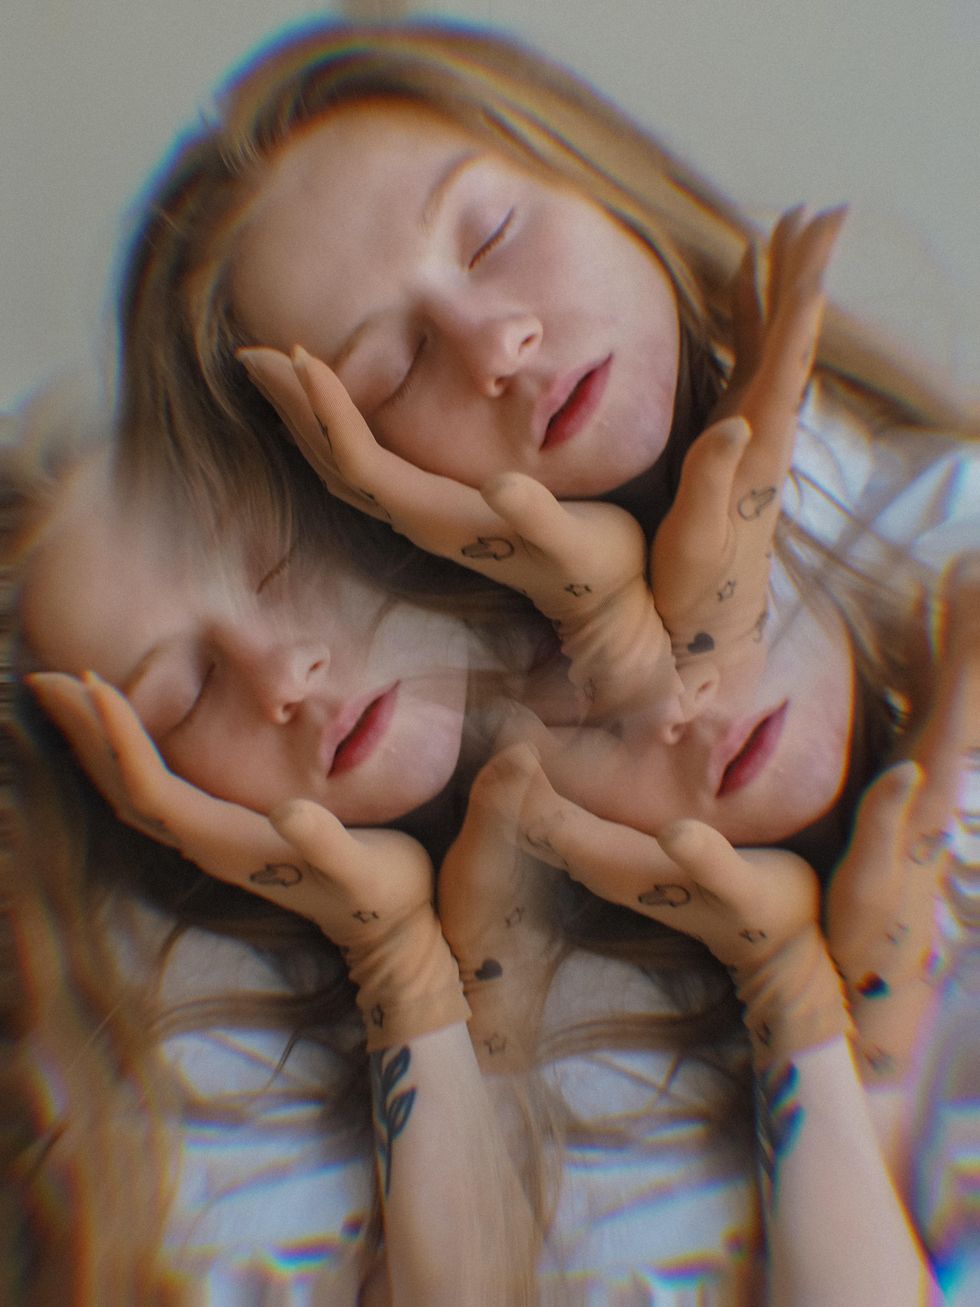 triple exposure photo of woman with eyes closed